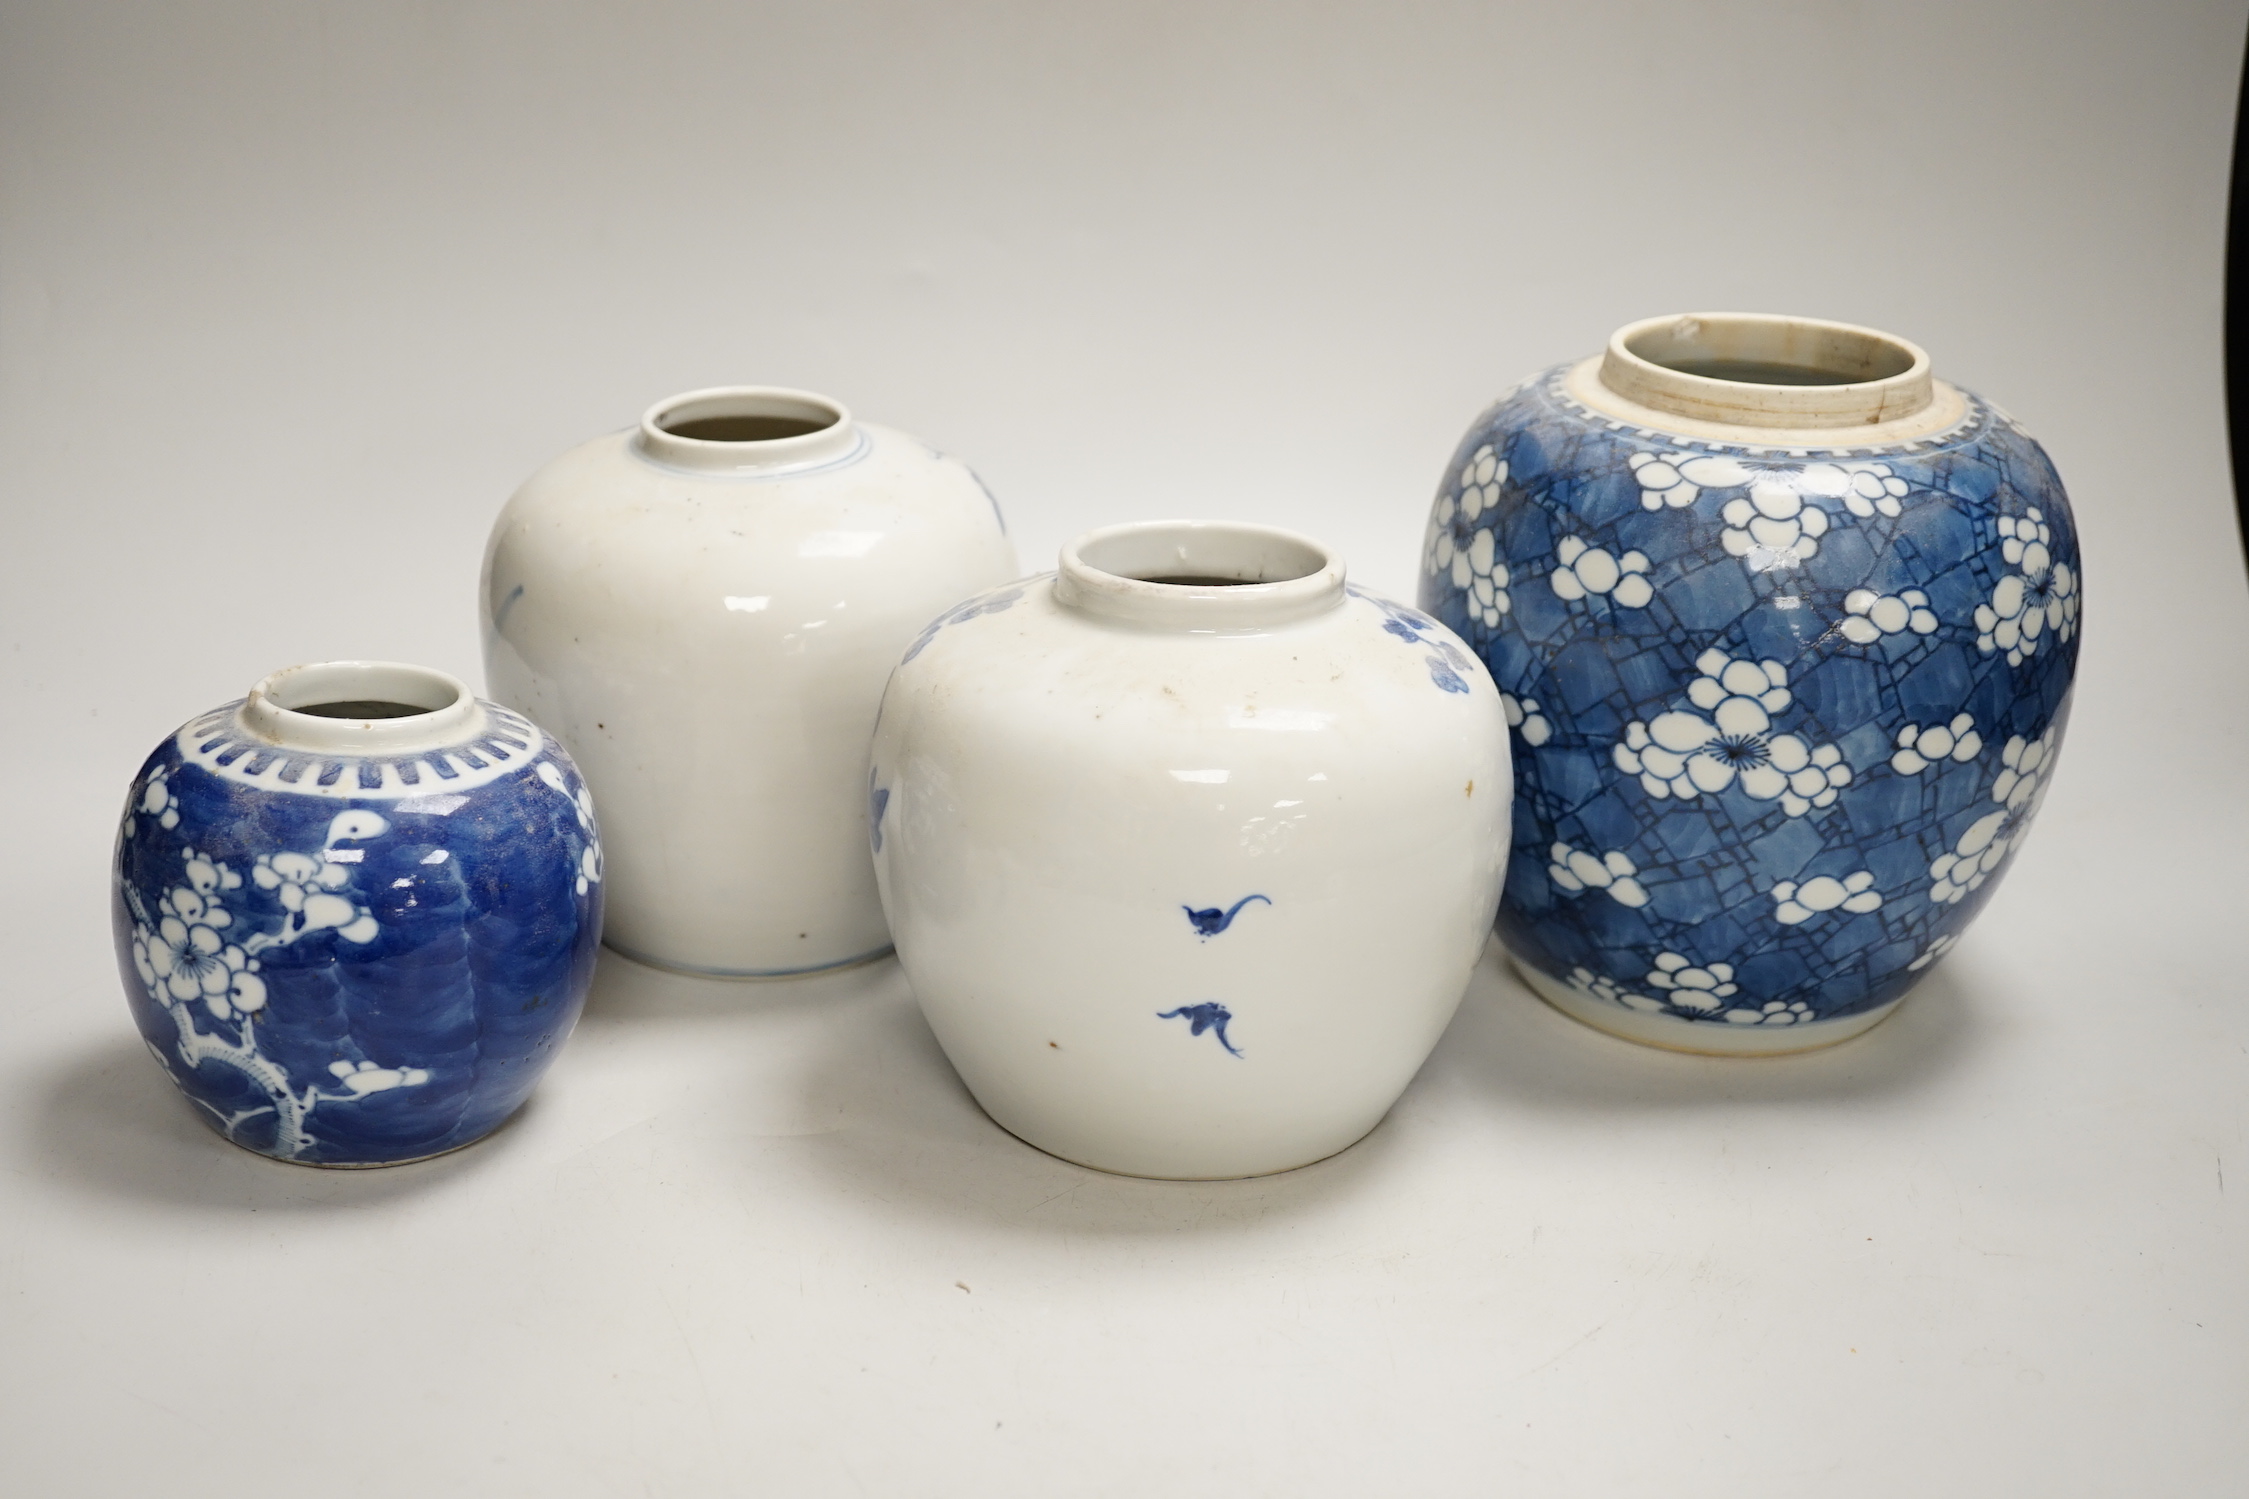 An 18th century Chinese blue and white Prunus jar and three 19th century Chinese blue and white jars, tallest 16cm